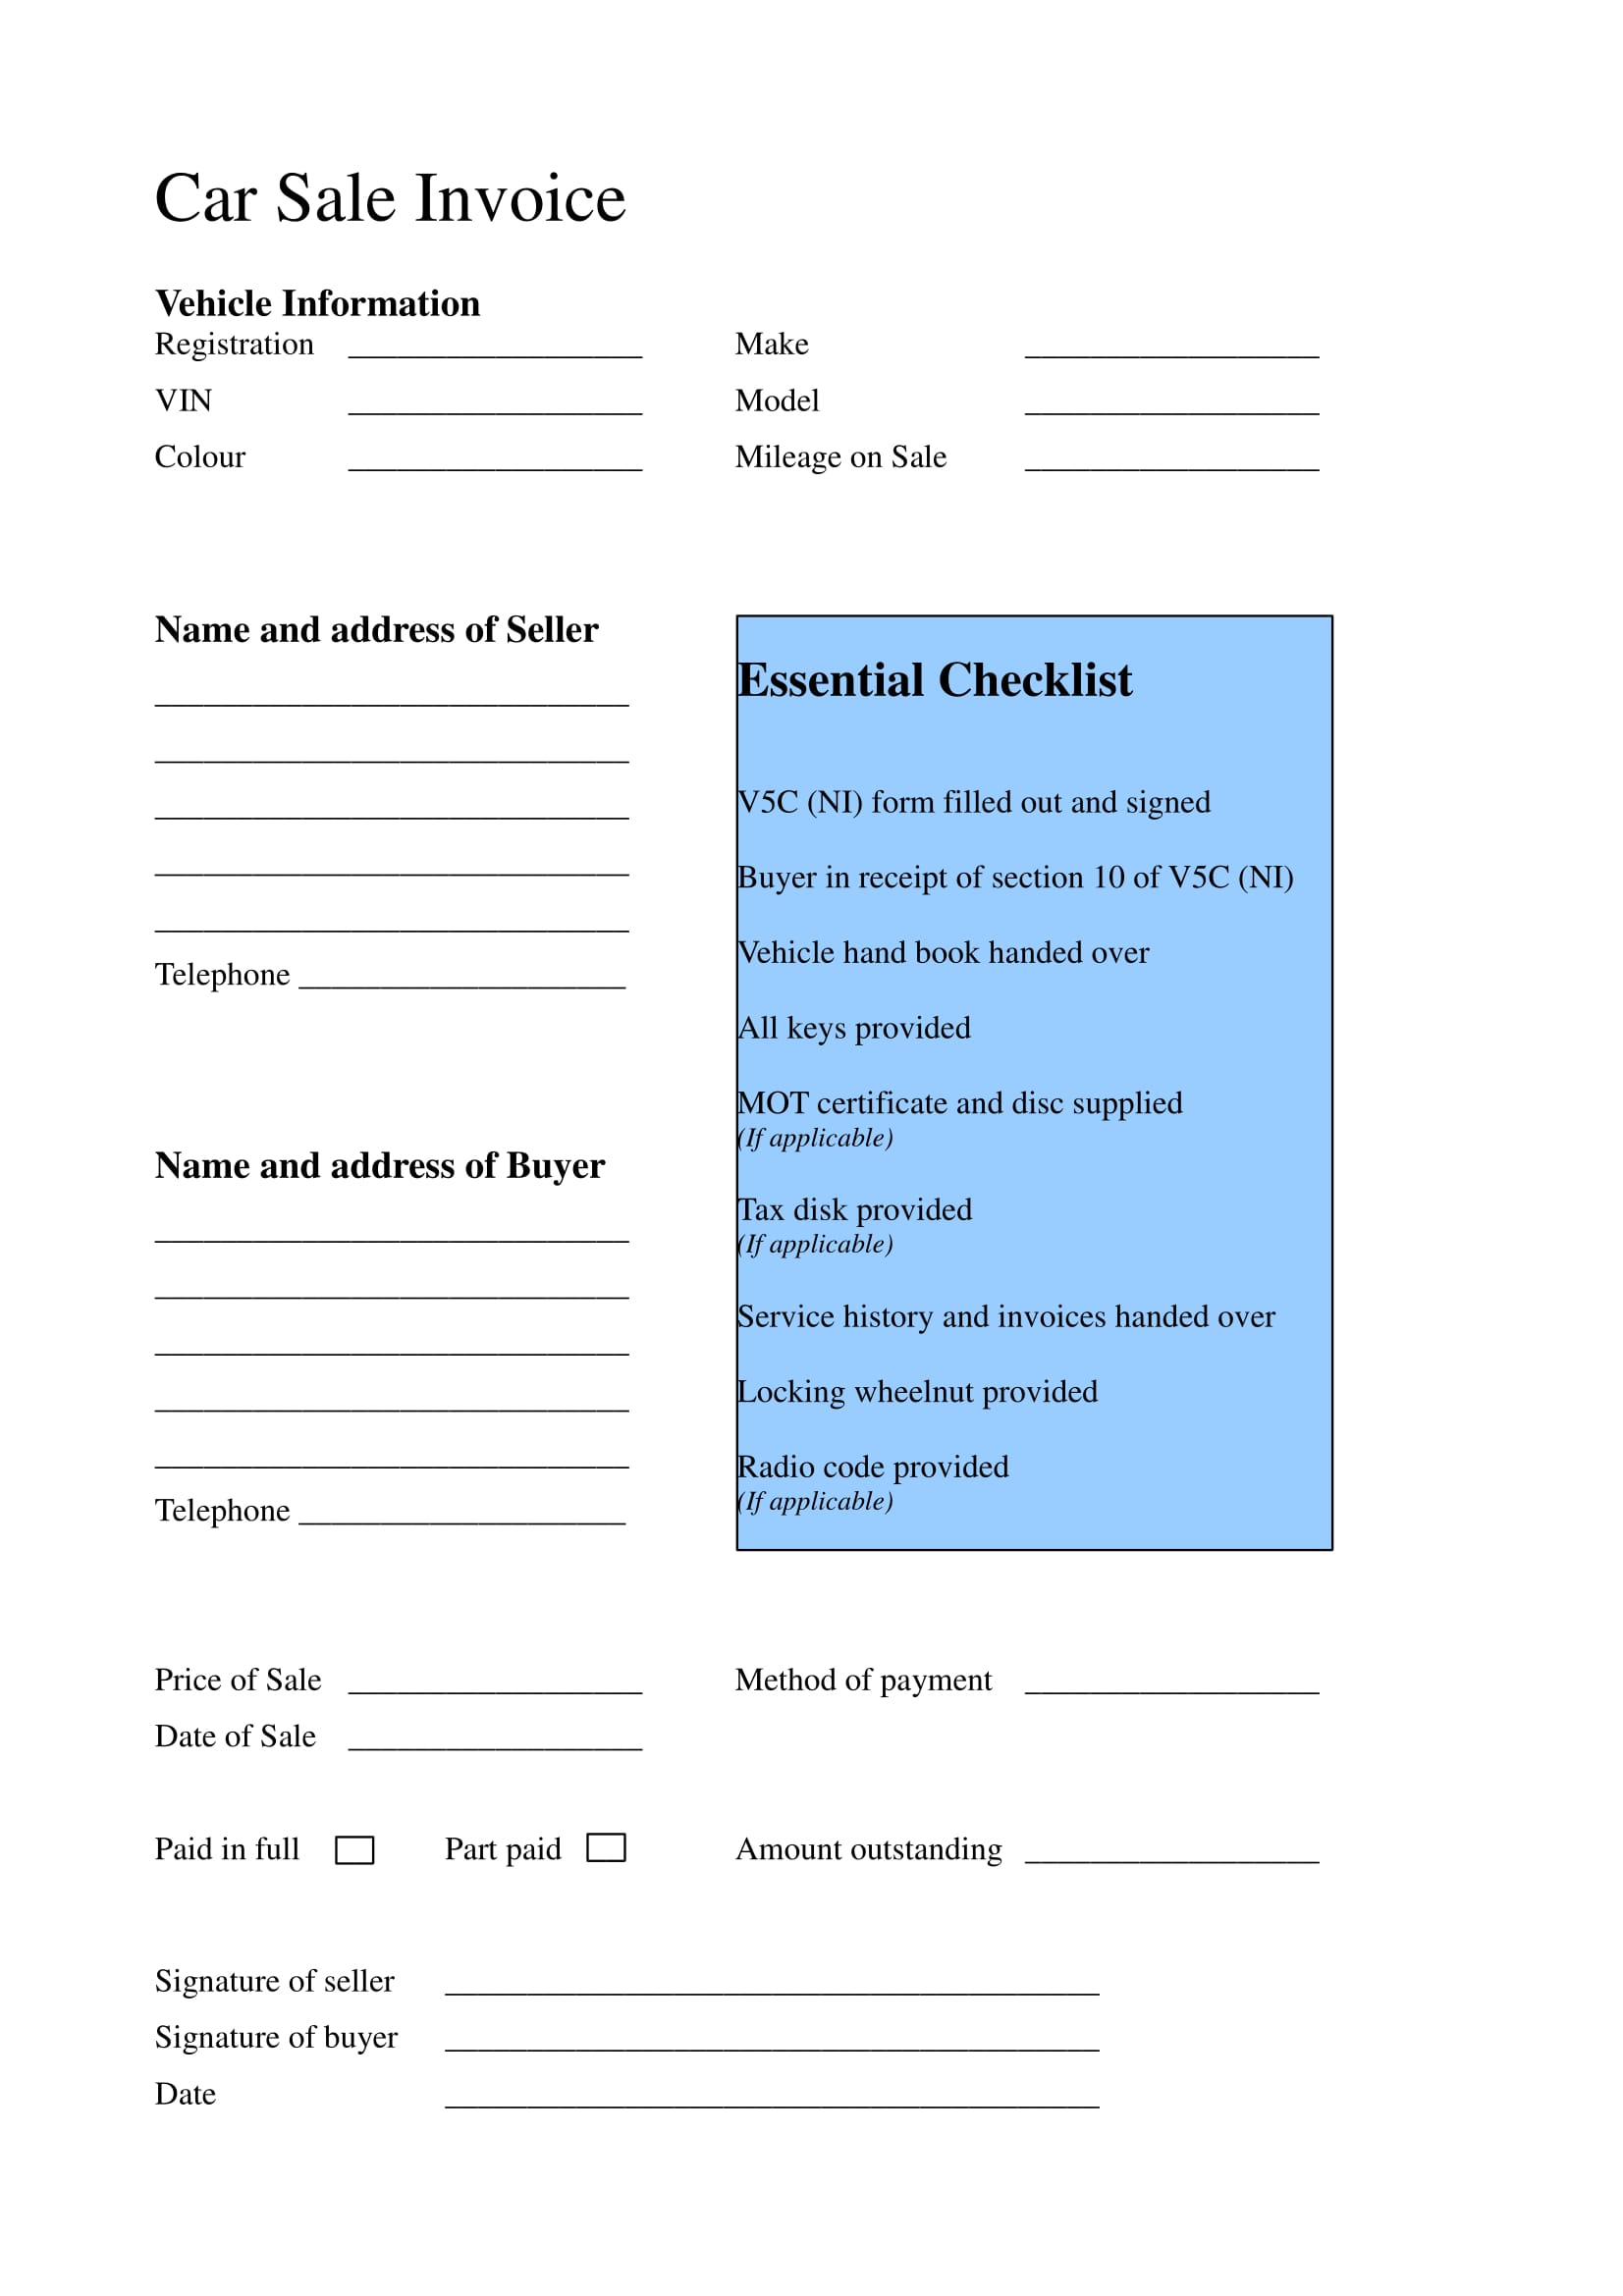 FREE 15 Business Forms For Car Dealers In PDF